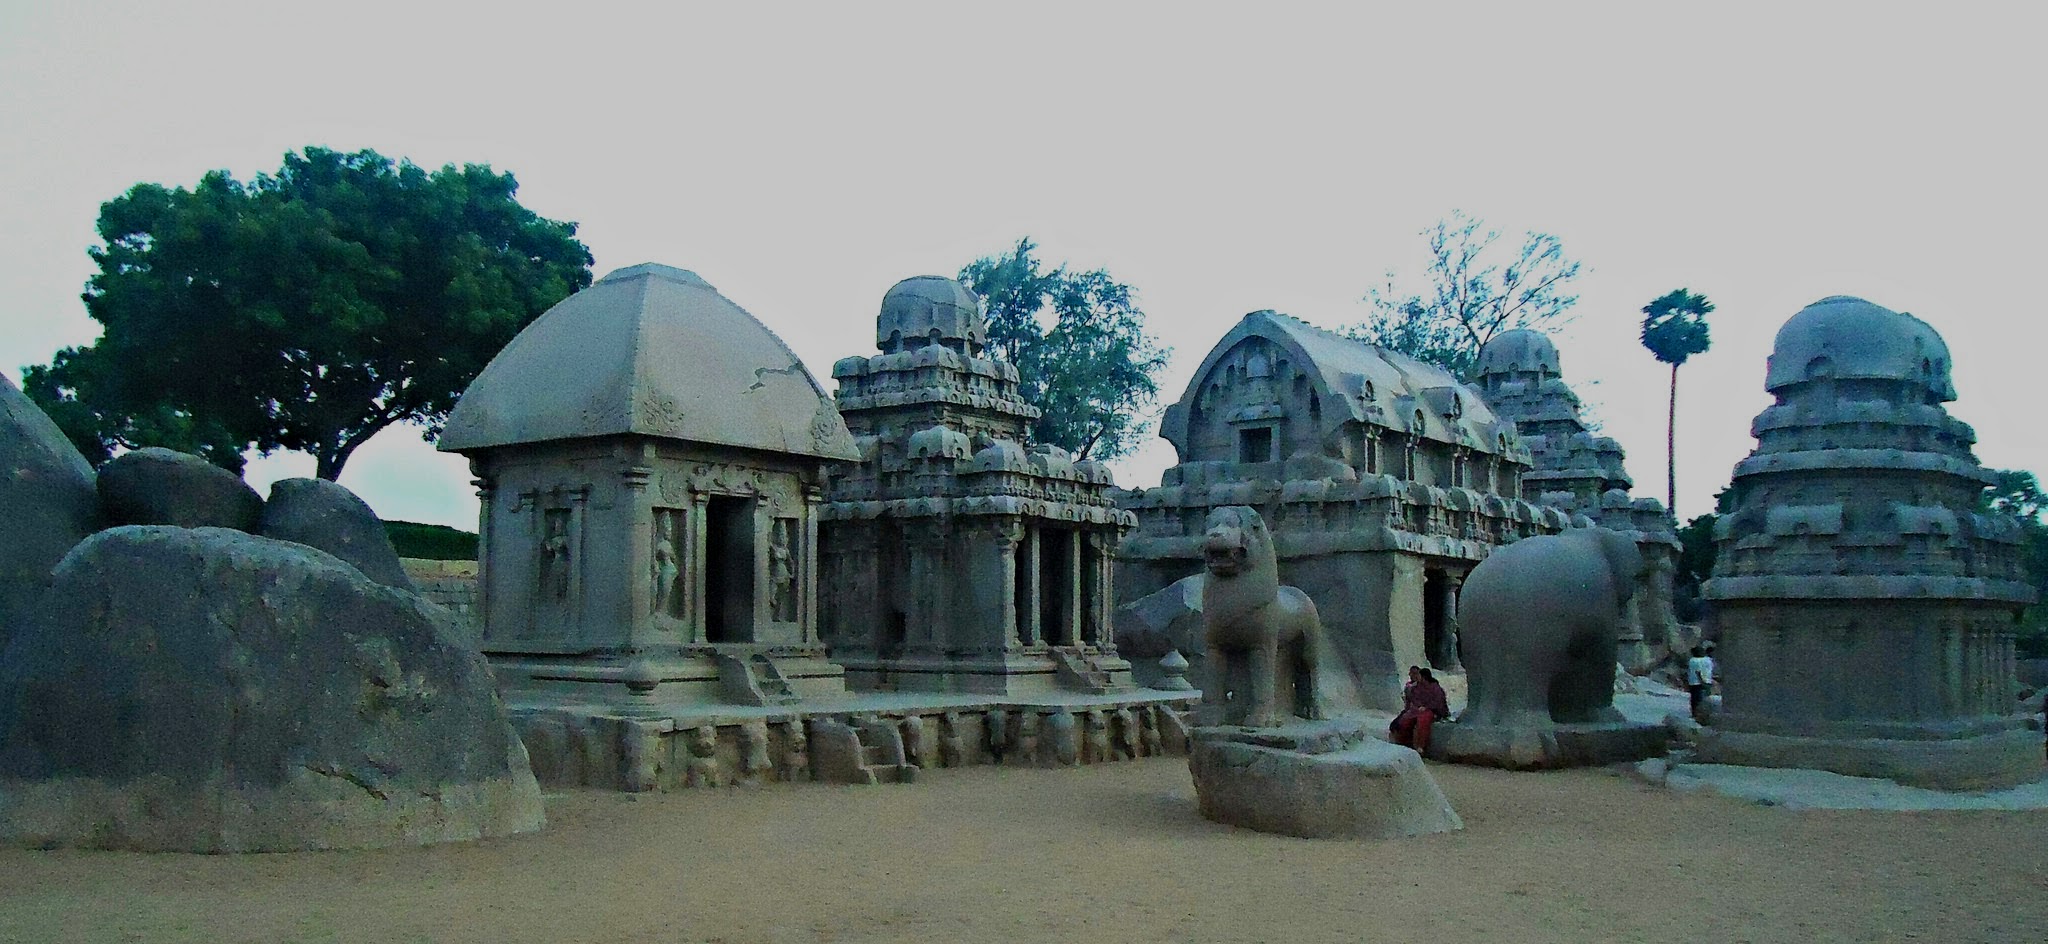 A Rich Cultural Heritage - A view of the Seven Pagodas at the Mahabalipuram